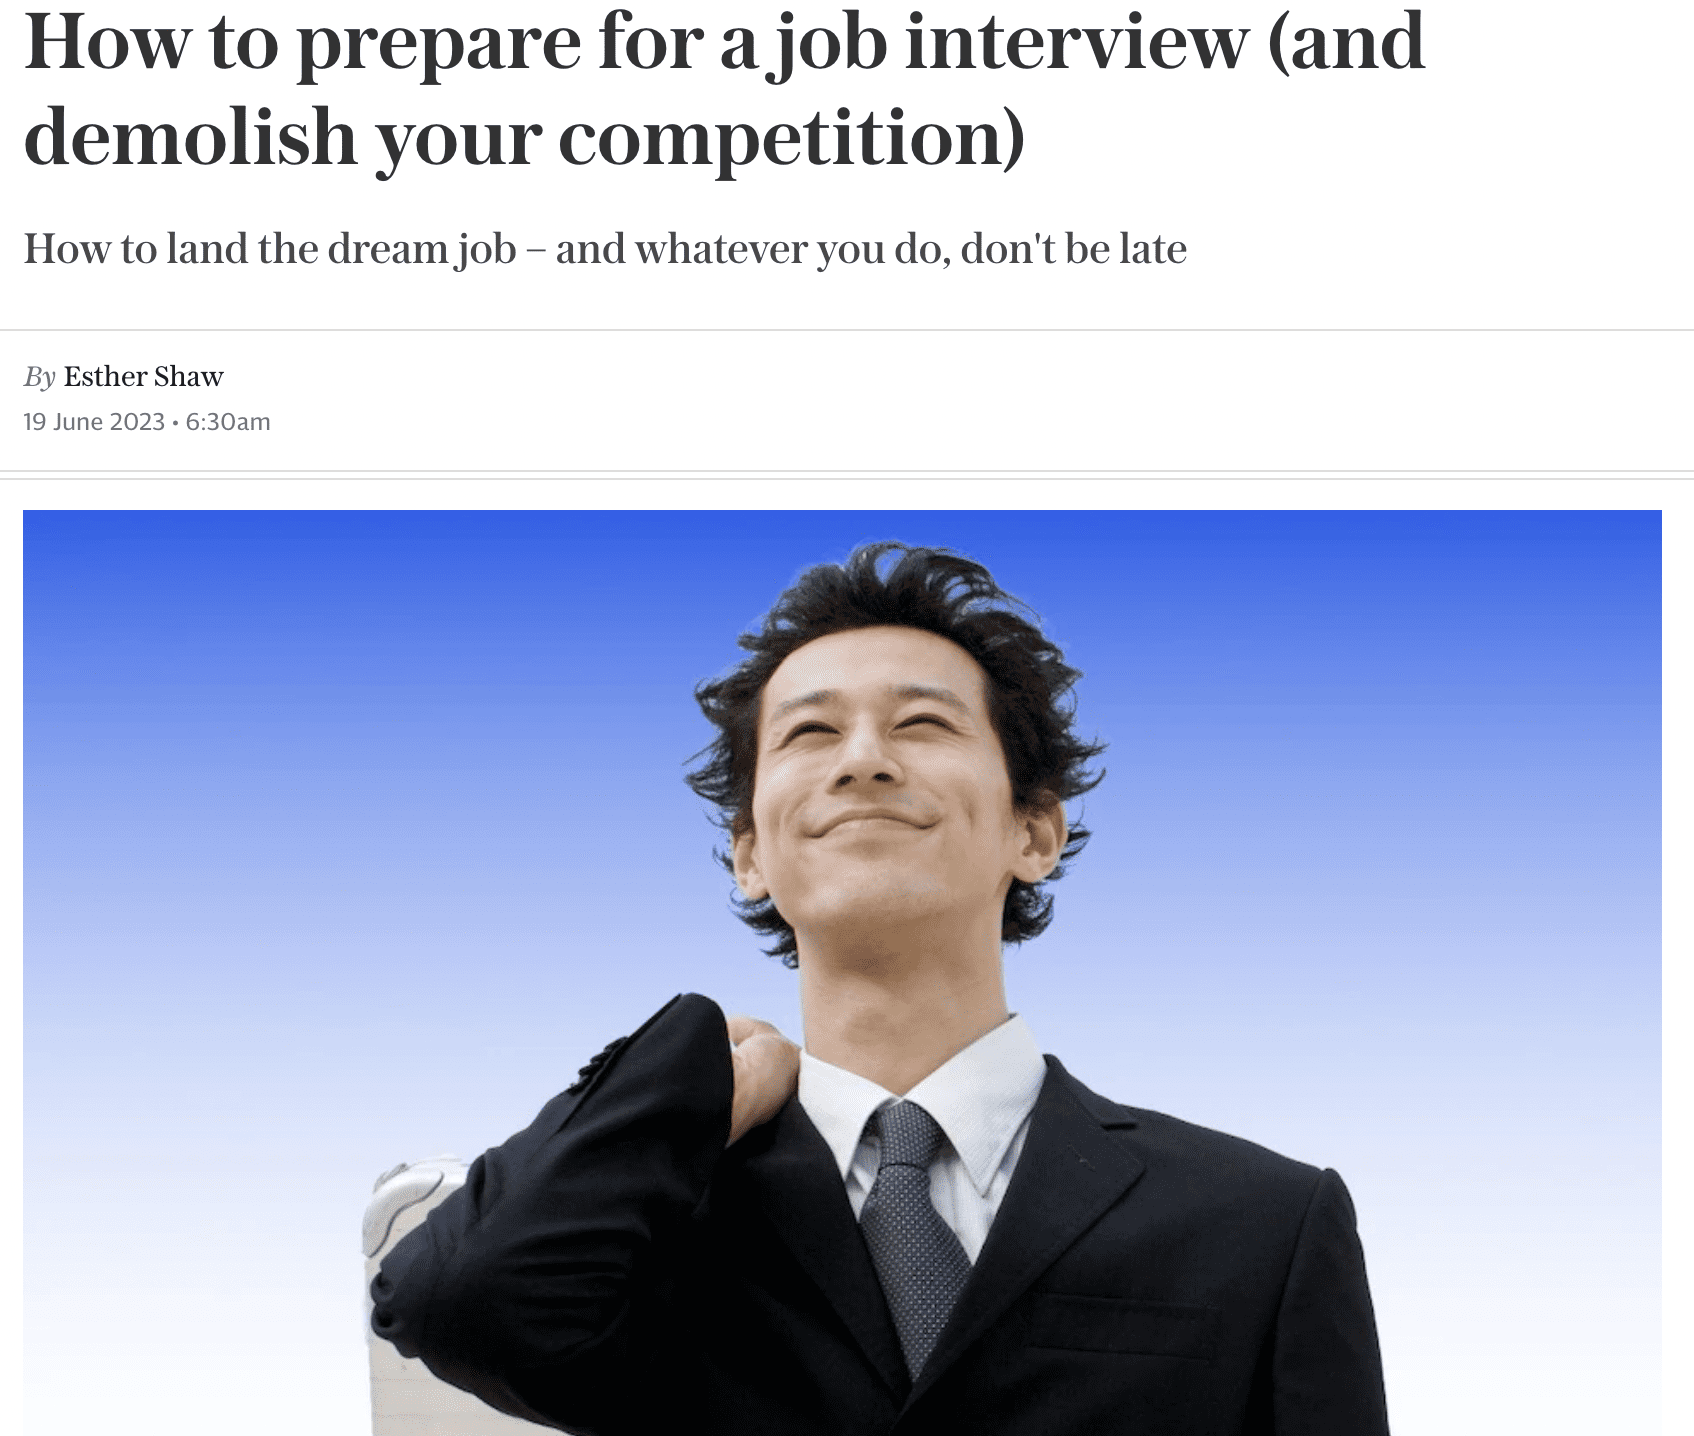 The Telegraph - June 2023

In this article, “How to prepare for a job interview (and demolish your competition)” written by Esther Shaw, Gina Visram shares some interview tips